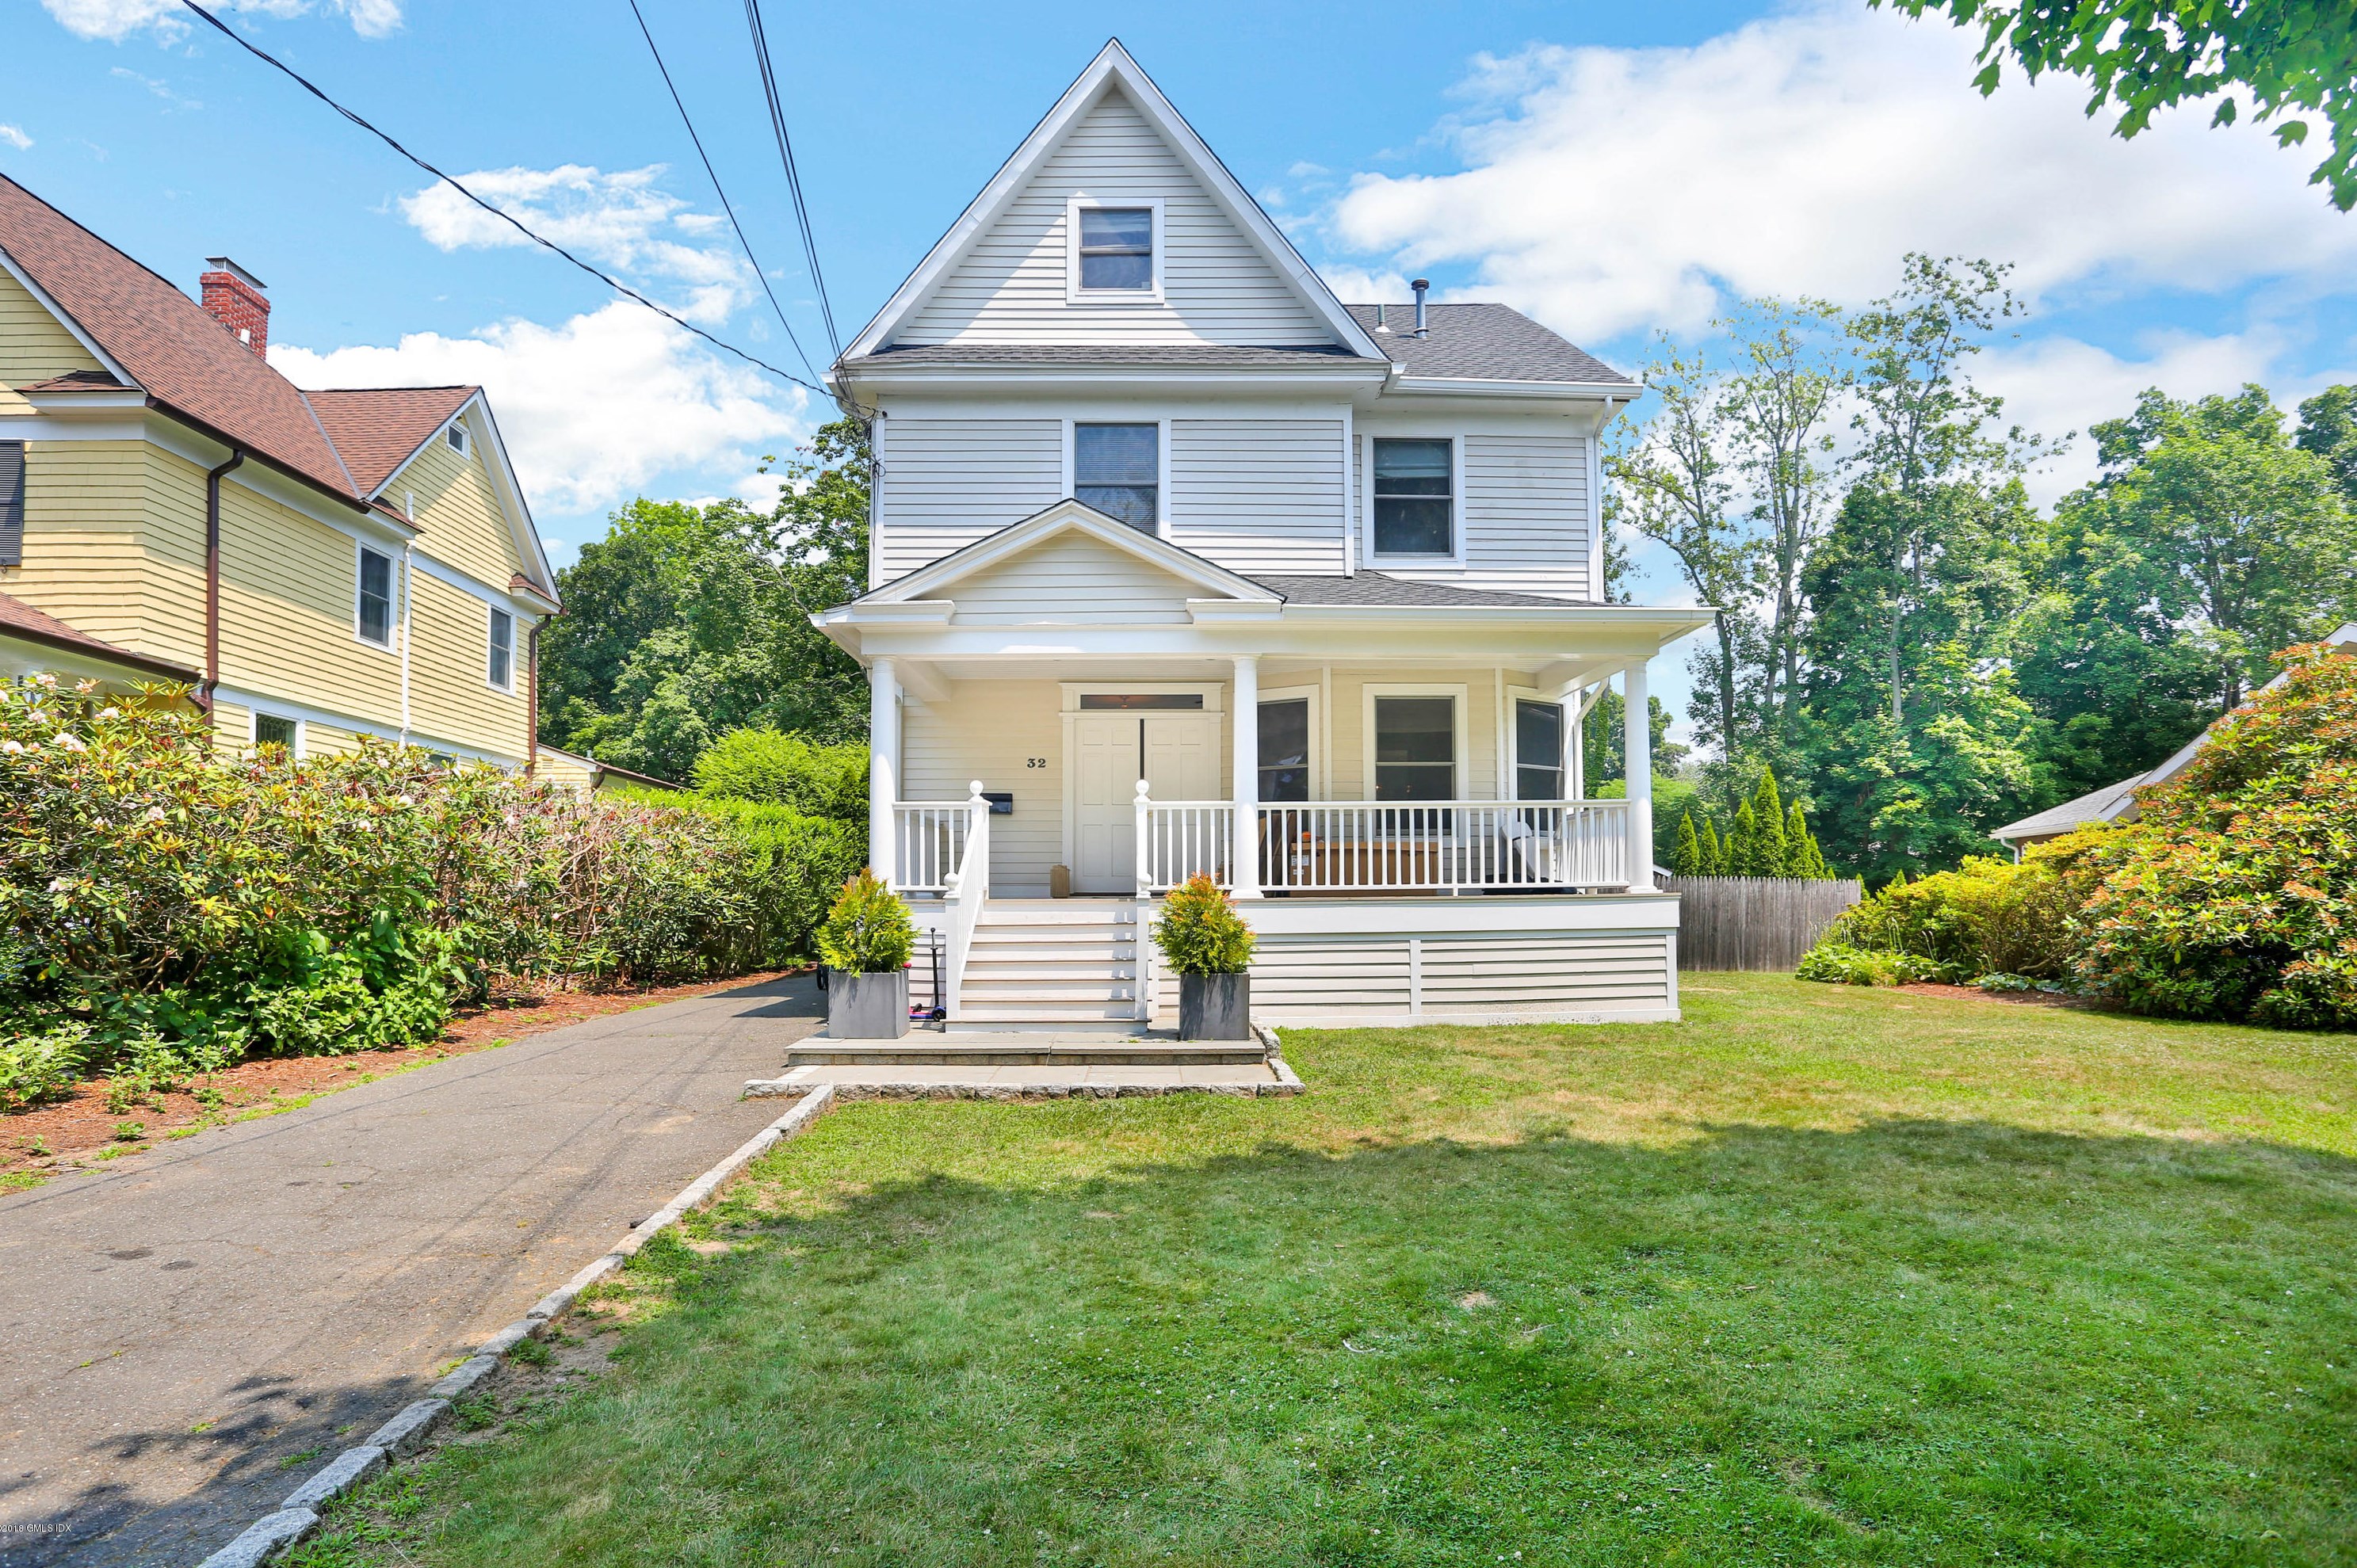 32 Highview Ave, Old Greenwich, CT 06870